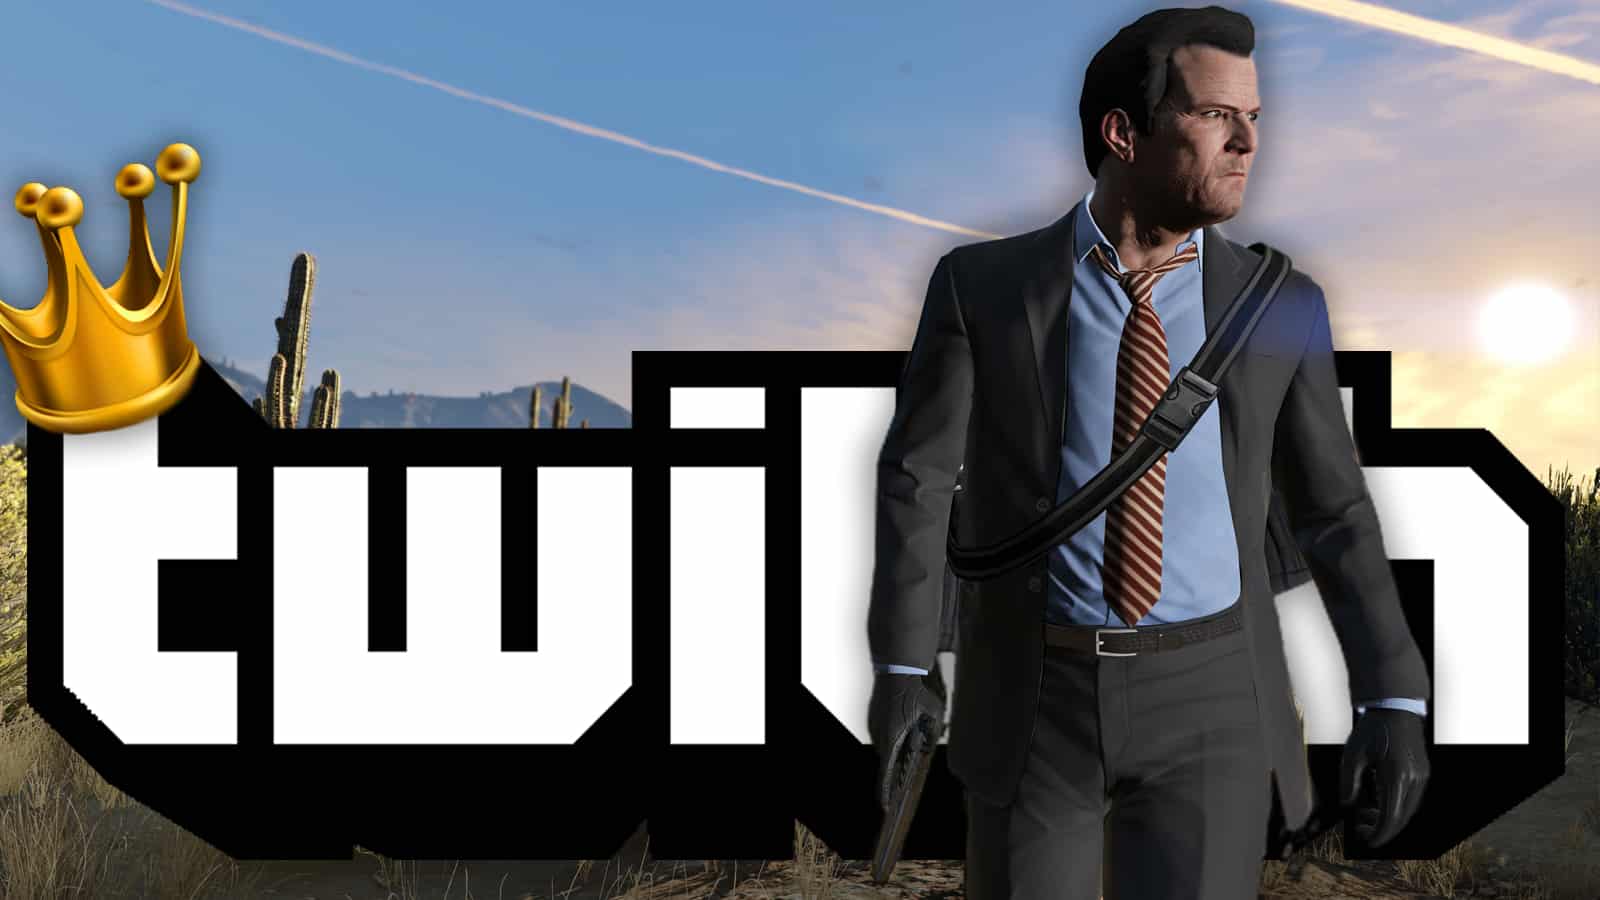 GTA character stands in front of Twitch logo.